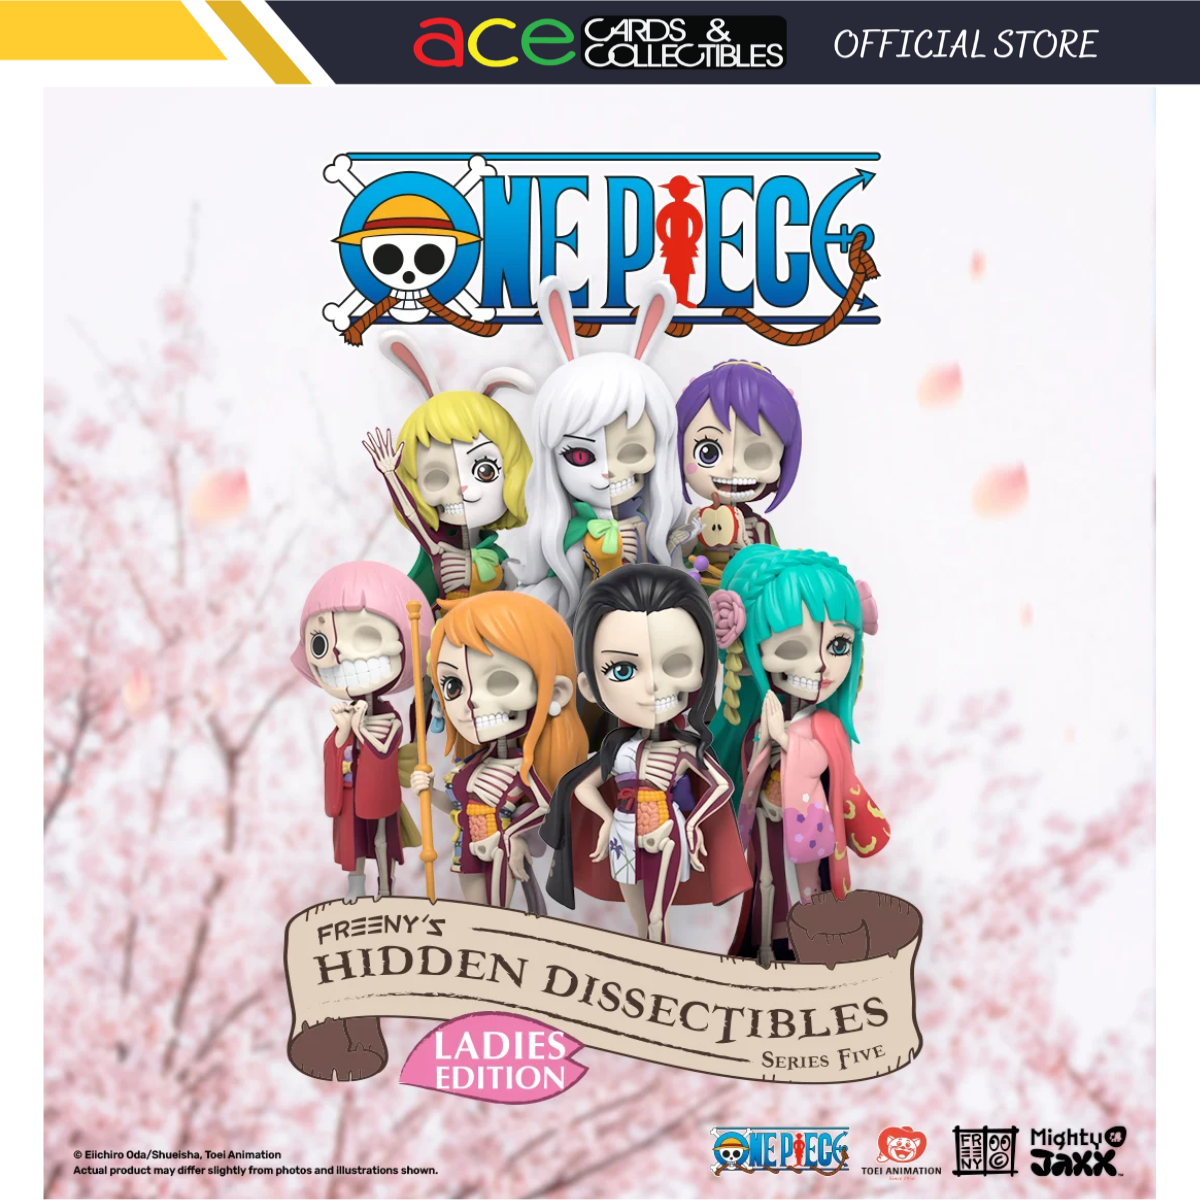 Mighty Jaxx x Freeny's Hidden Dissectibles One Piece Series 5 (Ladies Edition)-Single Box (Random)-Mighty Jaxx-Ace Cards & Collectibles